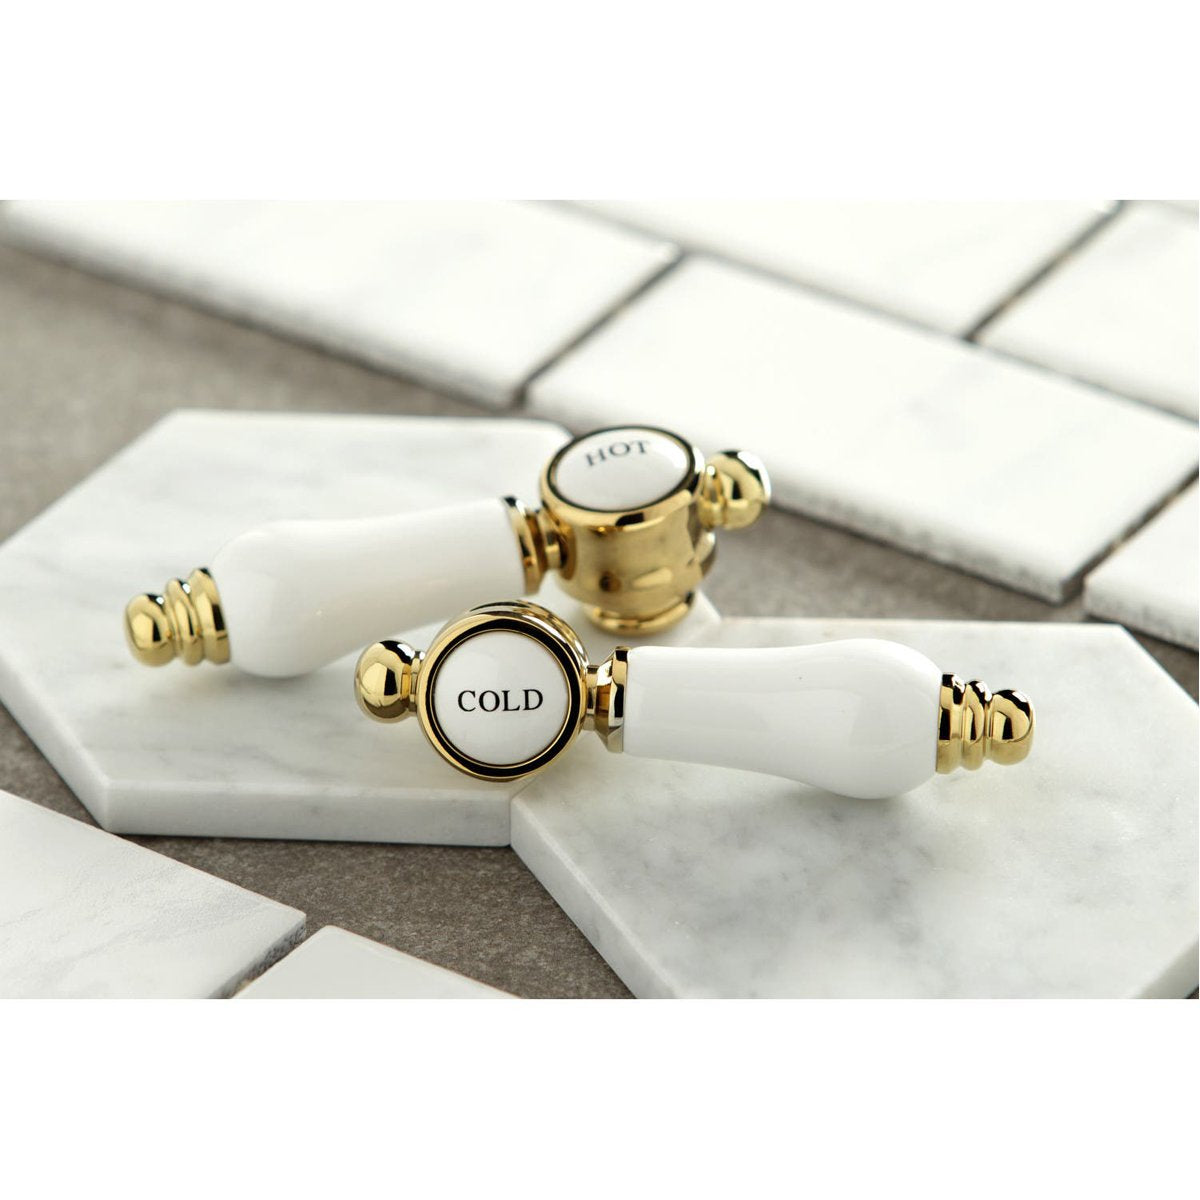 Kingston Brass Bel-Air Deck Mount Roman Tub Filler with Lever Handle